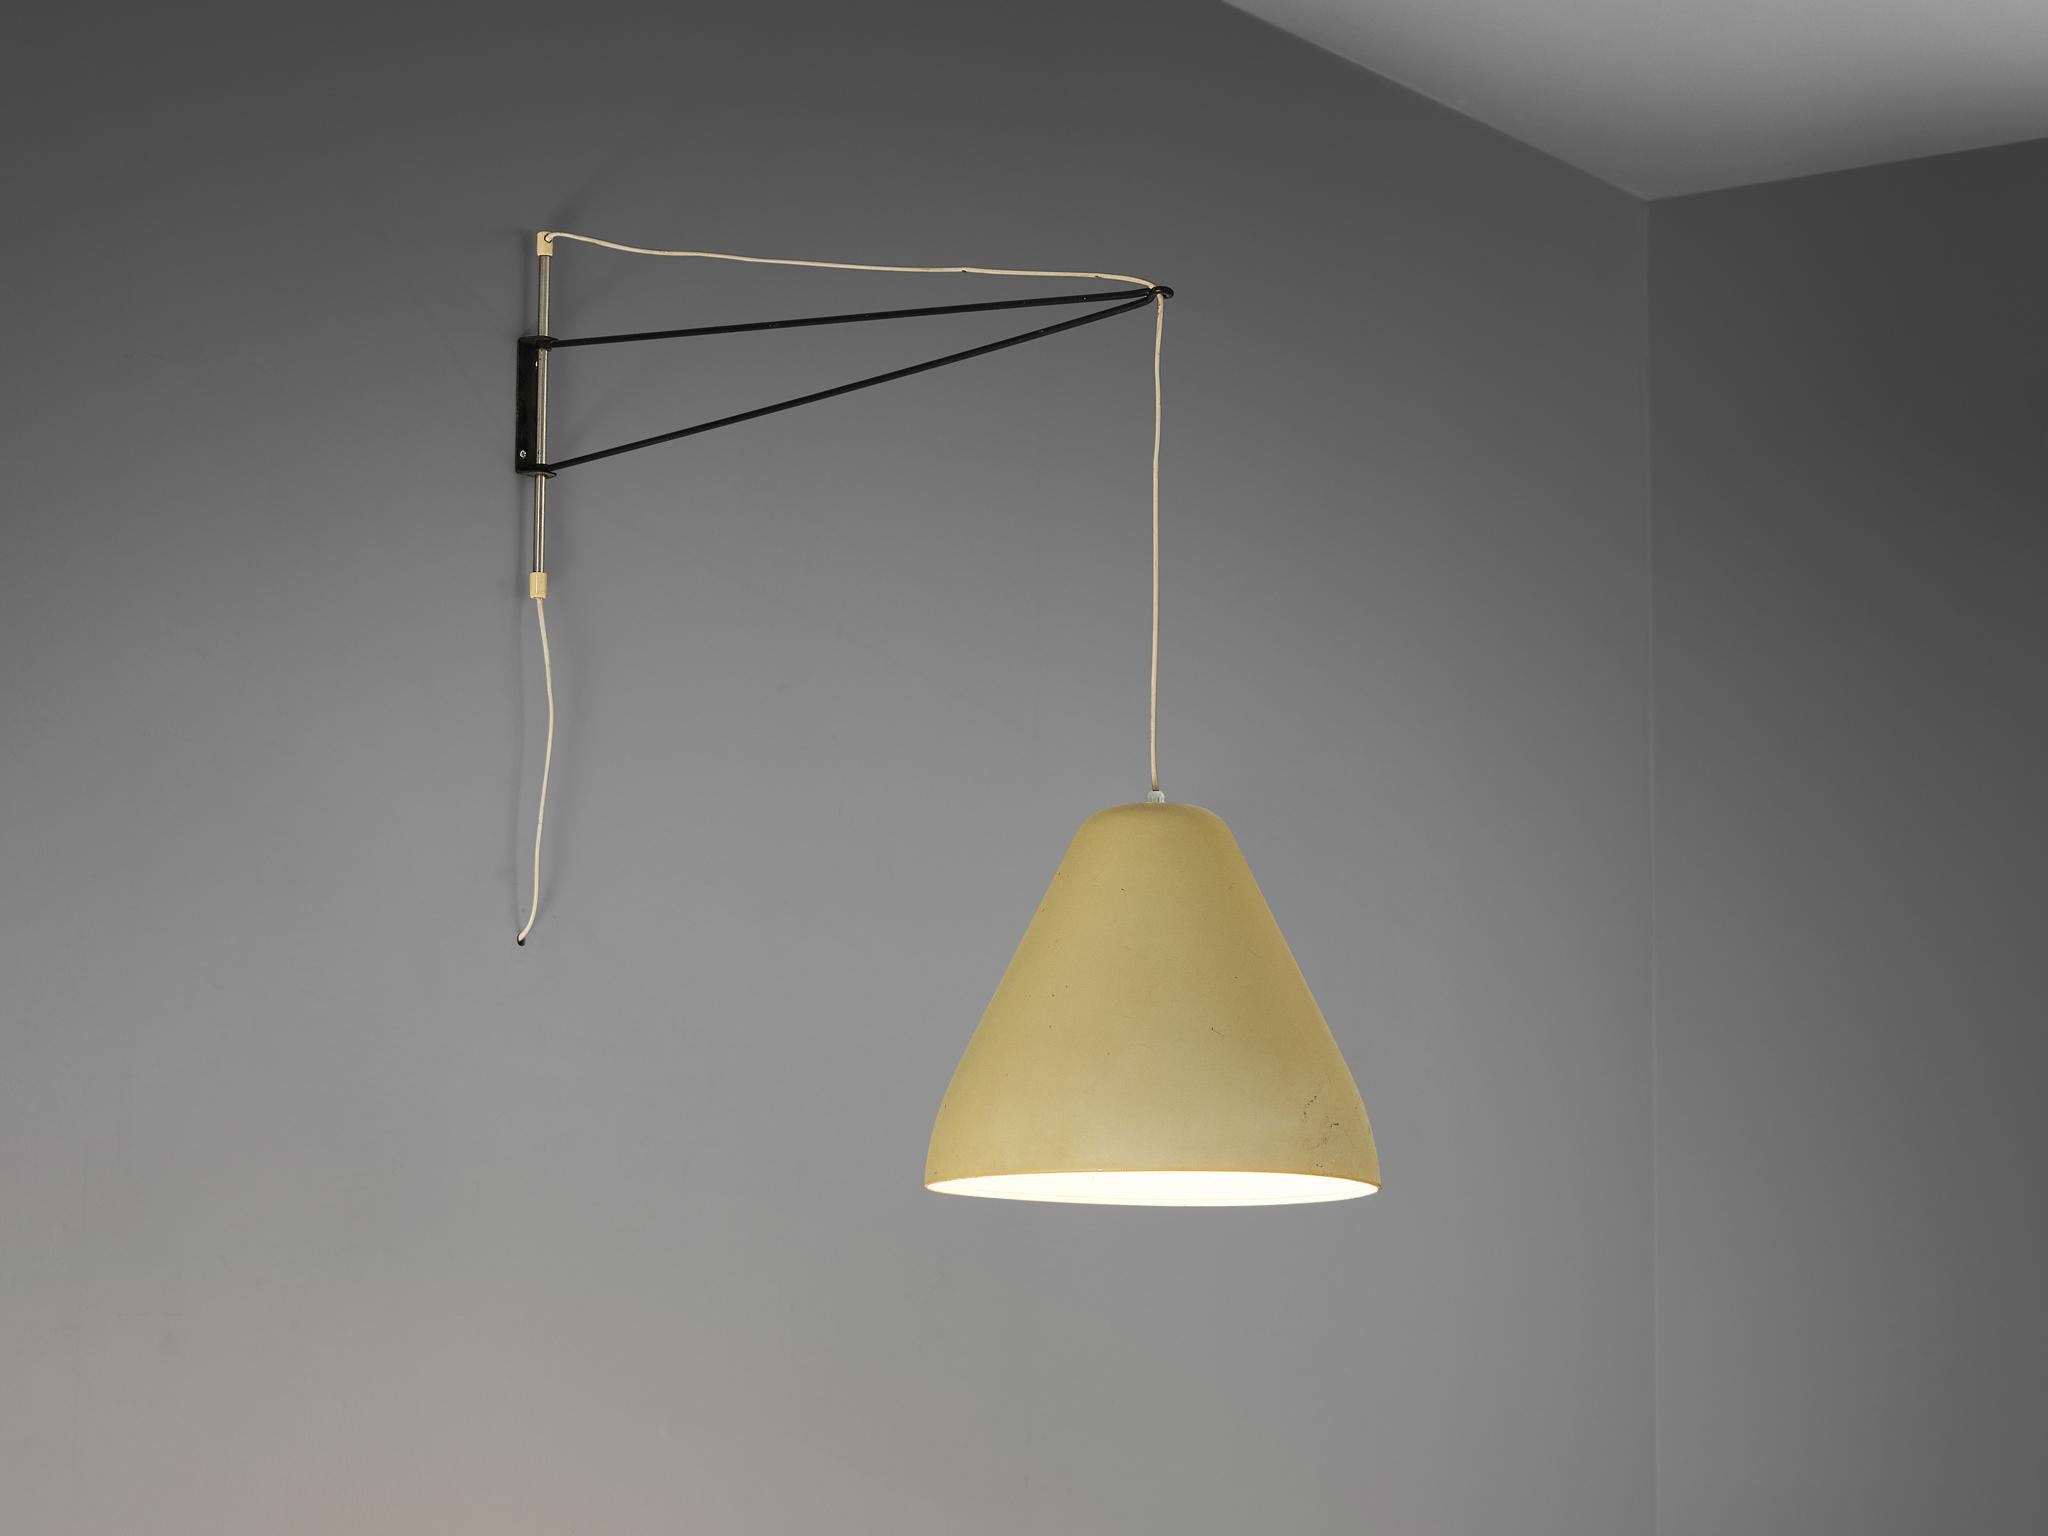 Wall lamp, metal, Italy, 1960s

Sophisticated wall light with swivel function made in Italy in the 1960s. This wall mounted light with very large yellow painted metal shade creates a nice contrast with the minimalistic thin black frame. Therefore,